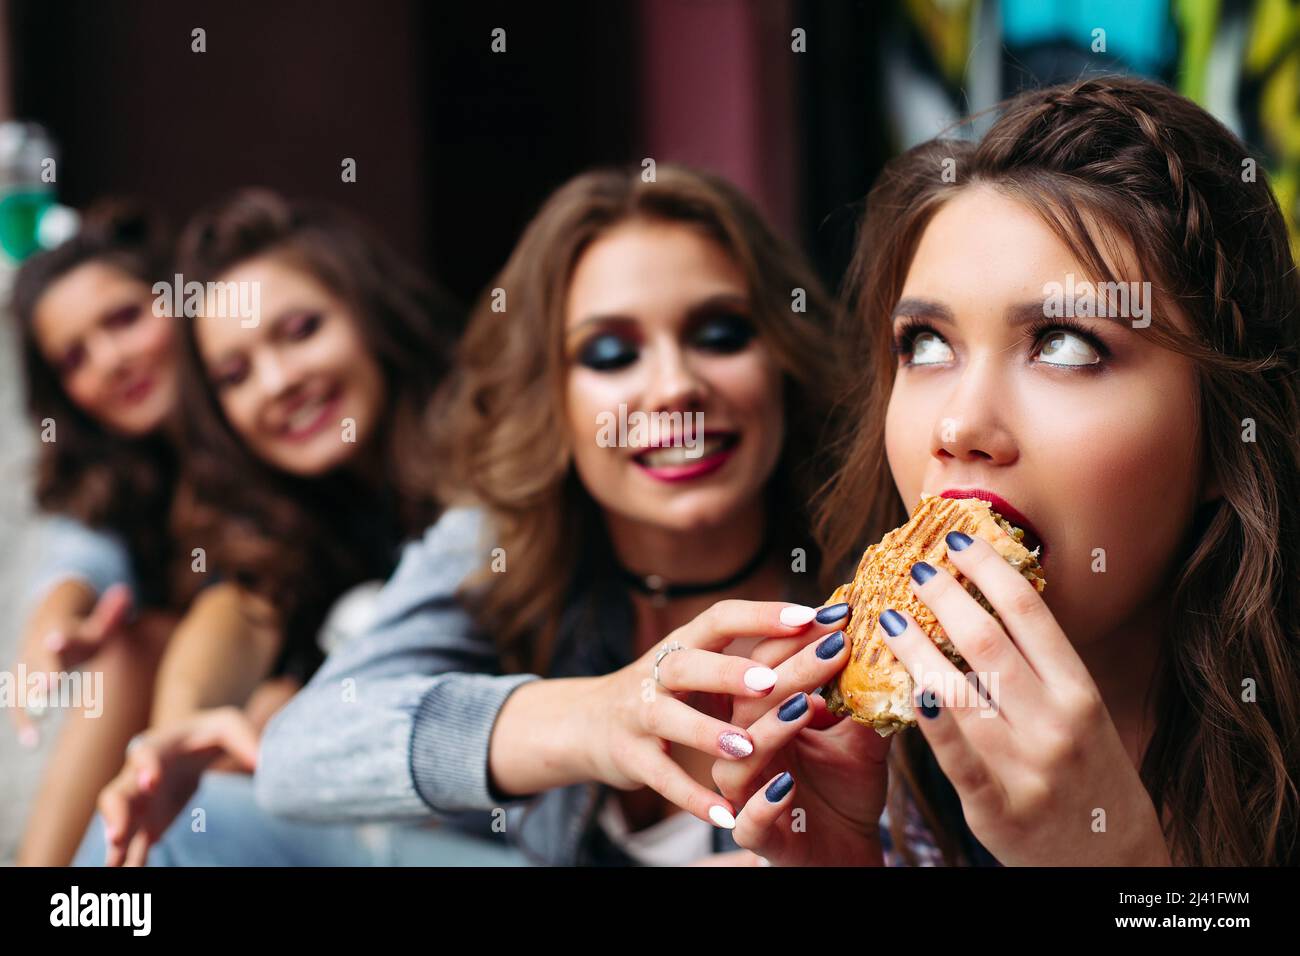 Smiling friends want to take girlfriend's burger while she eating it. Stock Photo